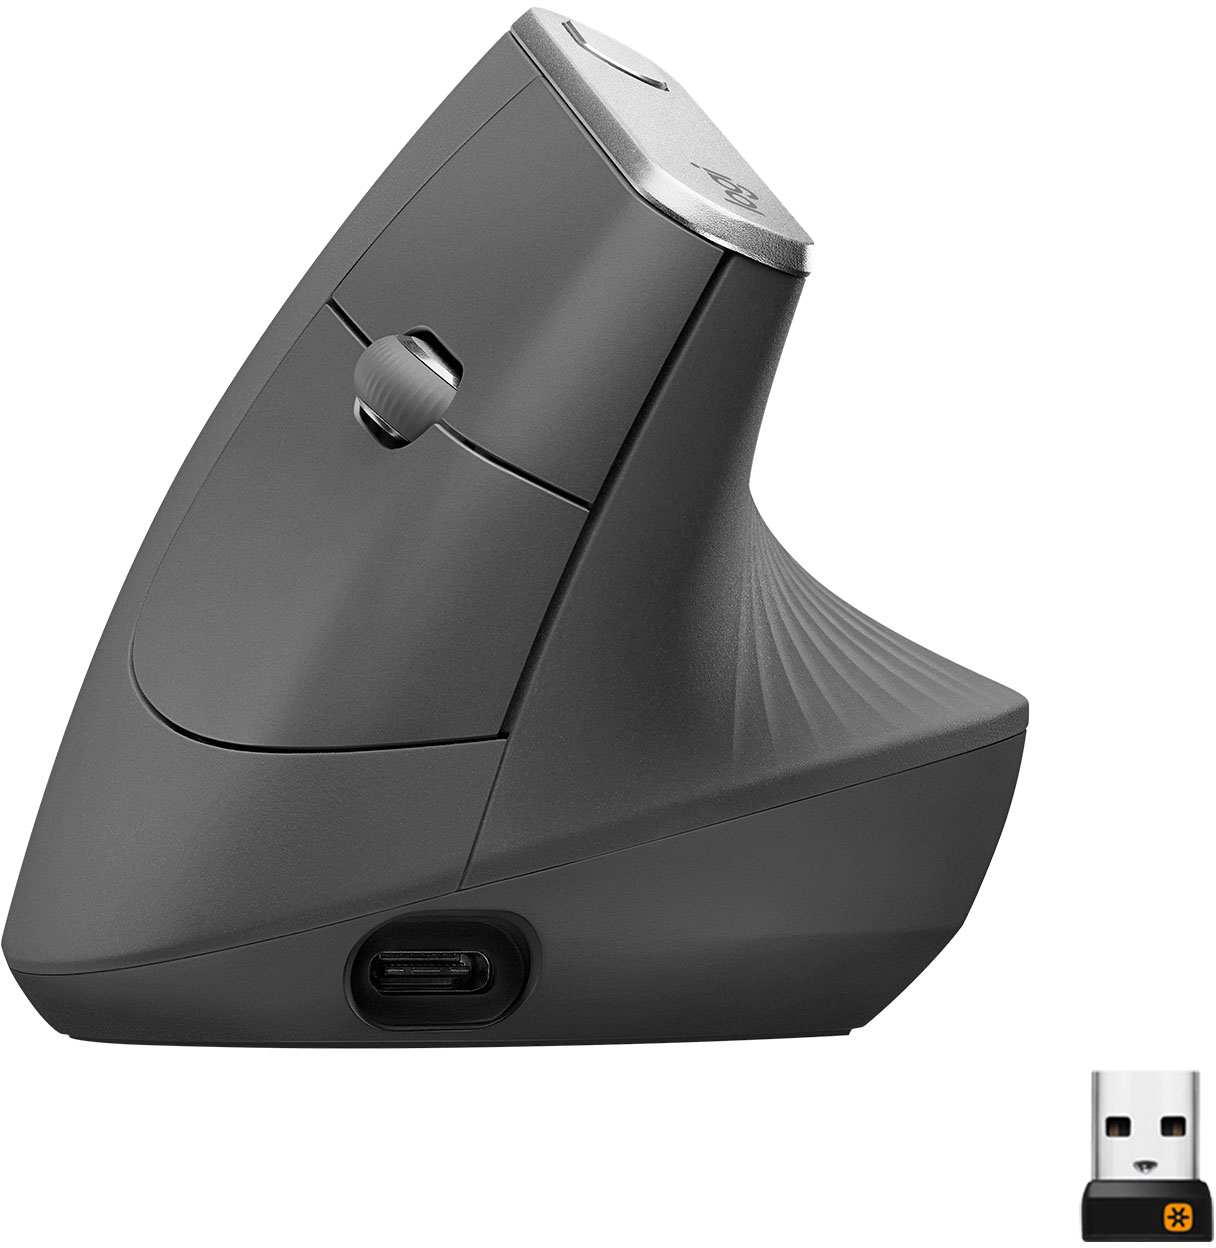 Logitech MX Vertical Advanced Wireless Optical Mouse with USB and Bluetooth Connection Graphite 910-005447 - Best